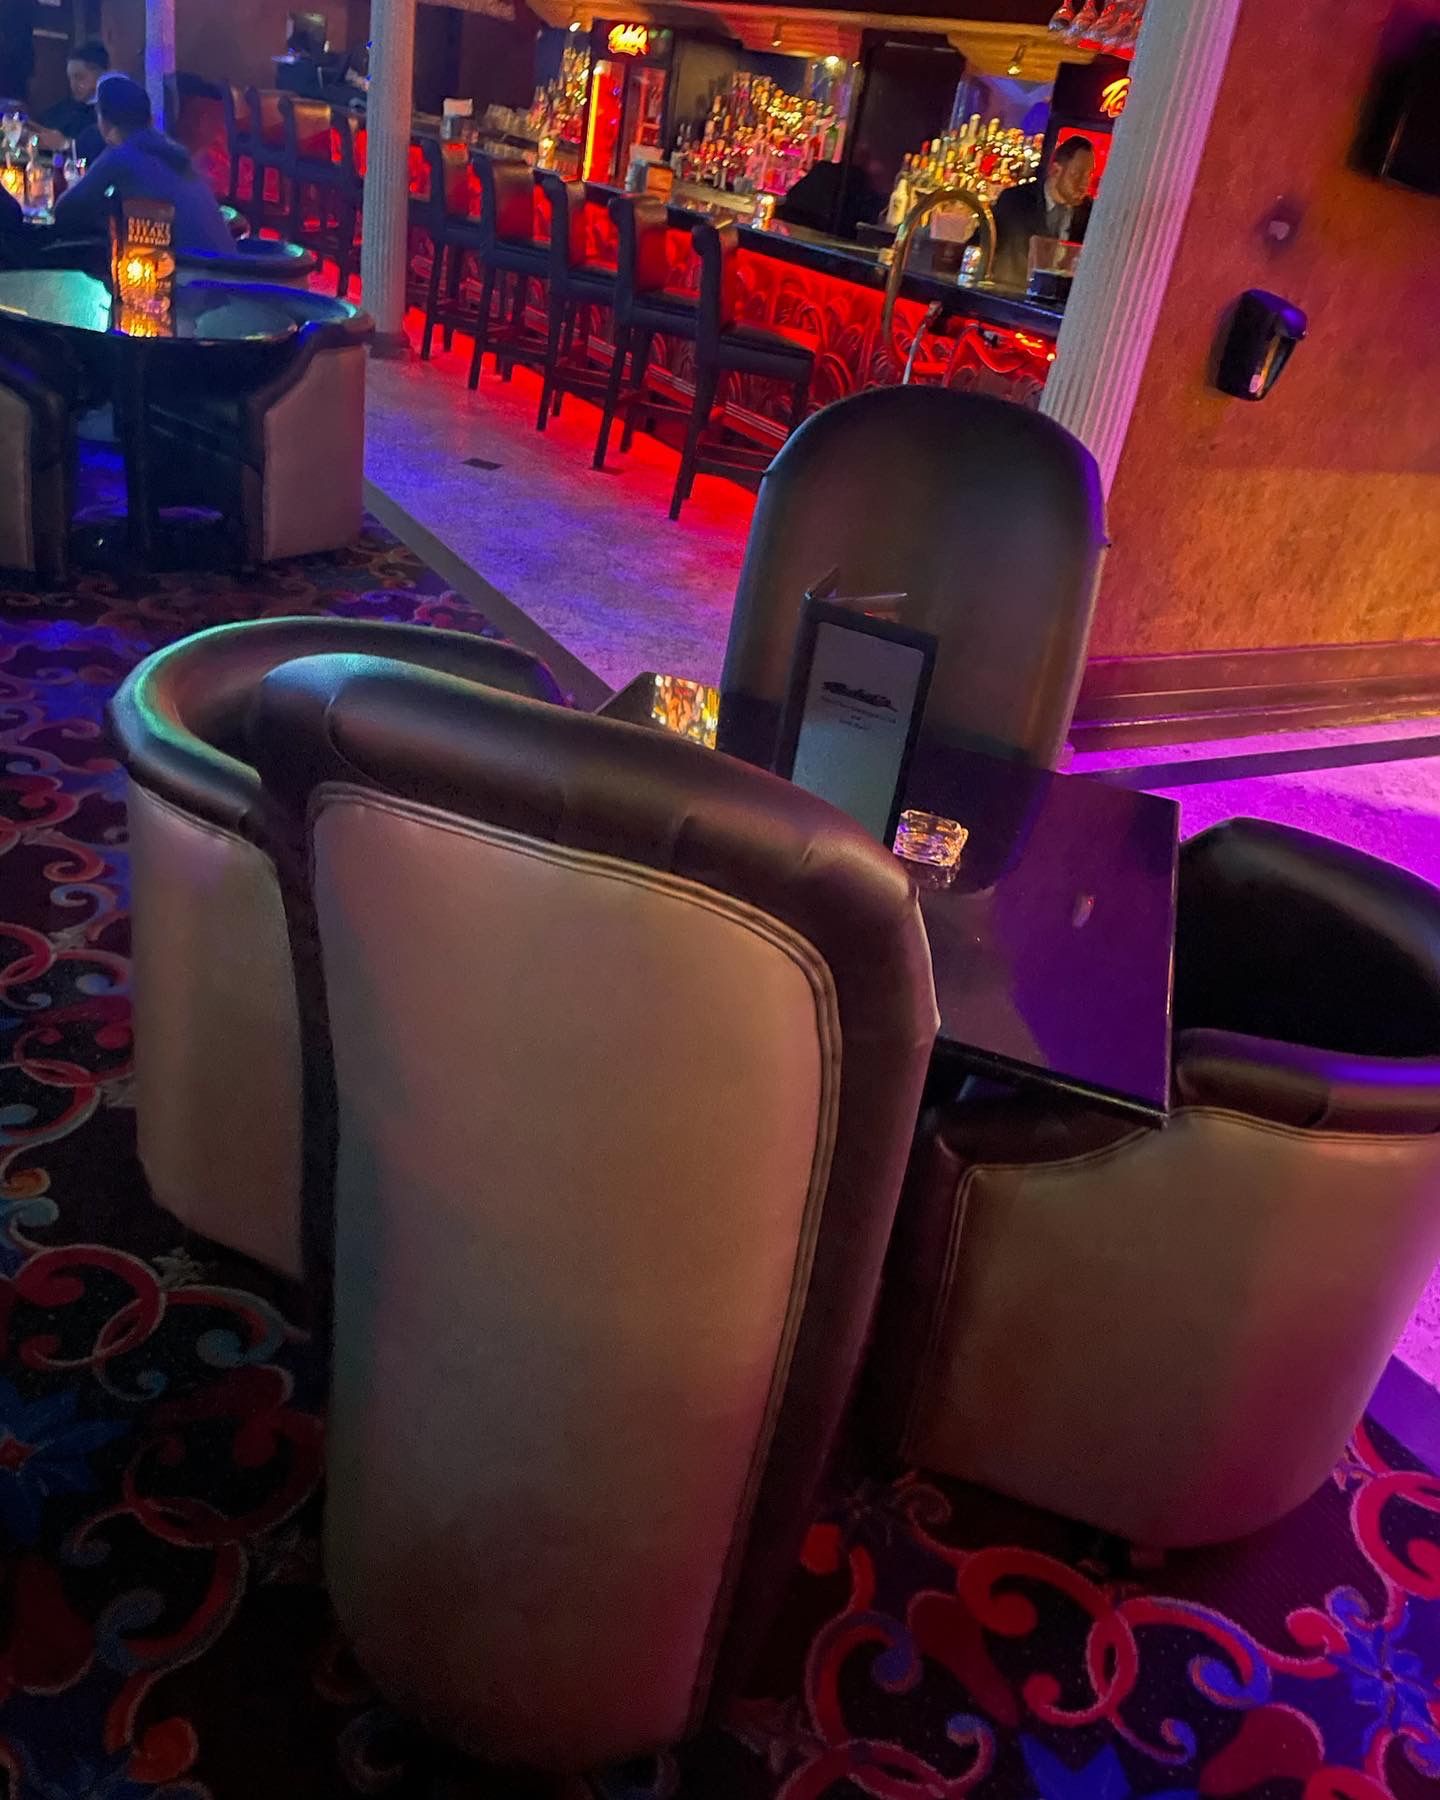 tables with parlor chairs around them in a nightclub